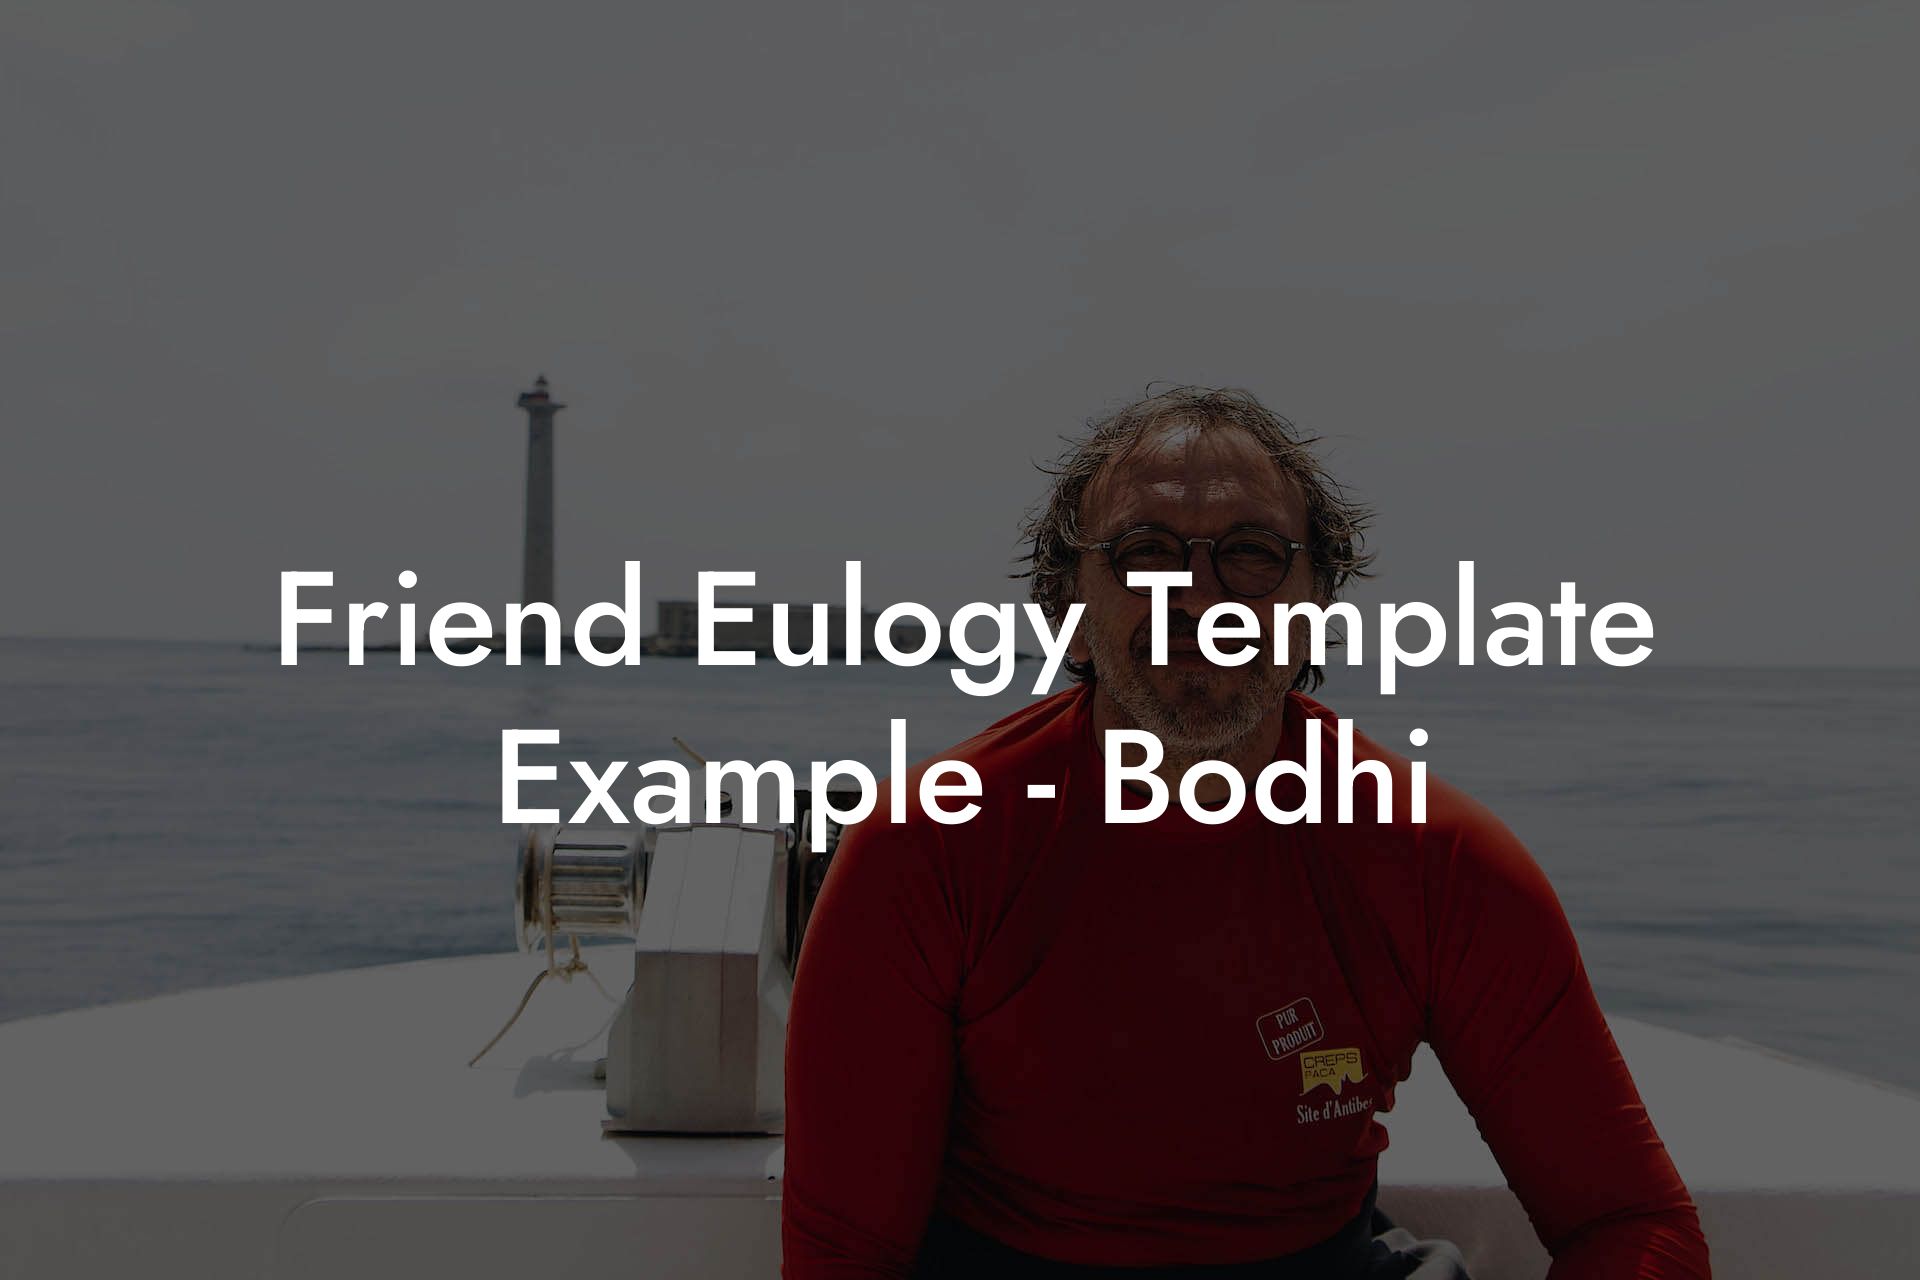 Friend Eulogy Template Example - Bodhi